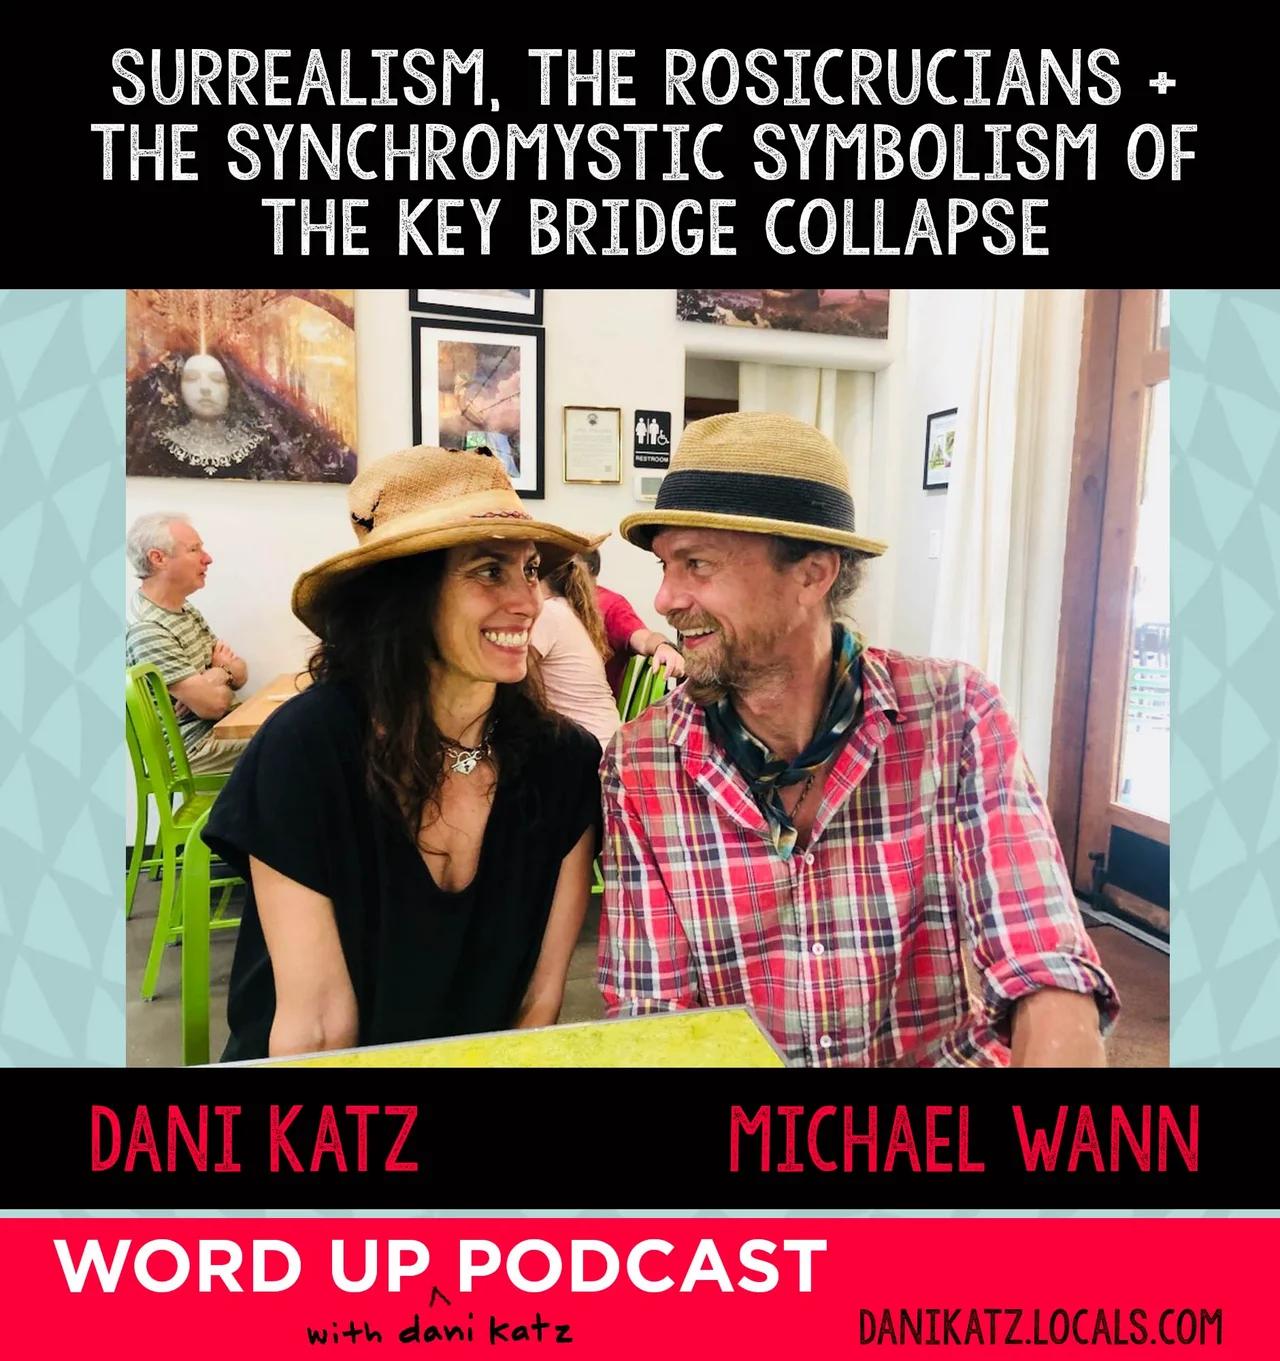 Surrealism, the Rosicrucians + the Key Bridge Collapse: Eclipse Aftermathing with Michael Wann. Part 1